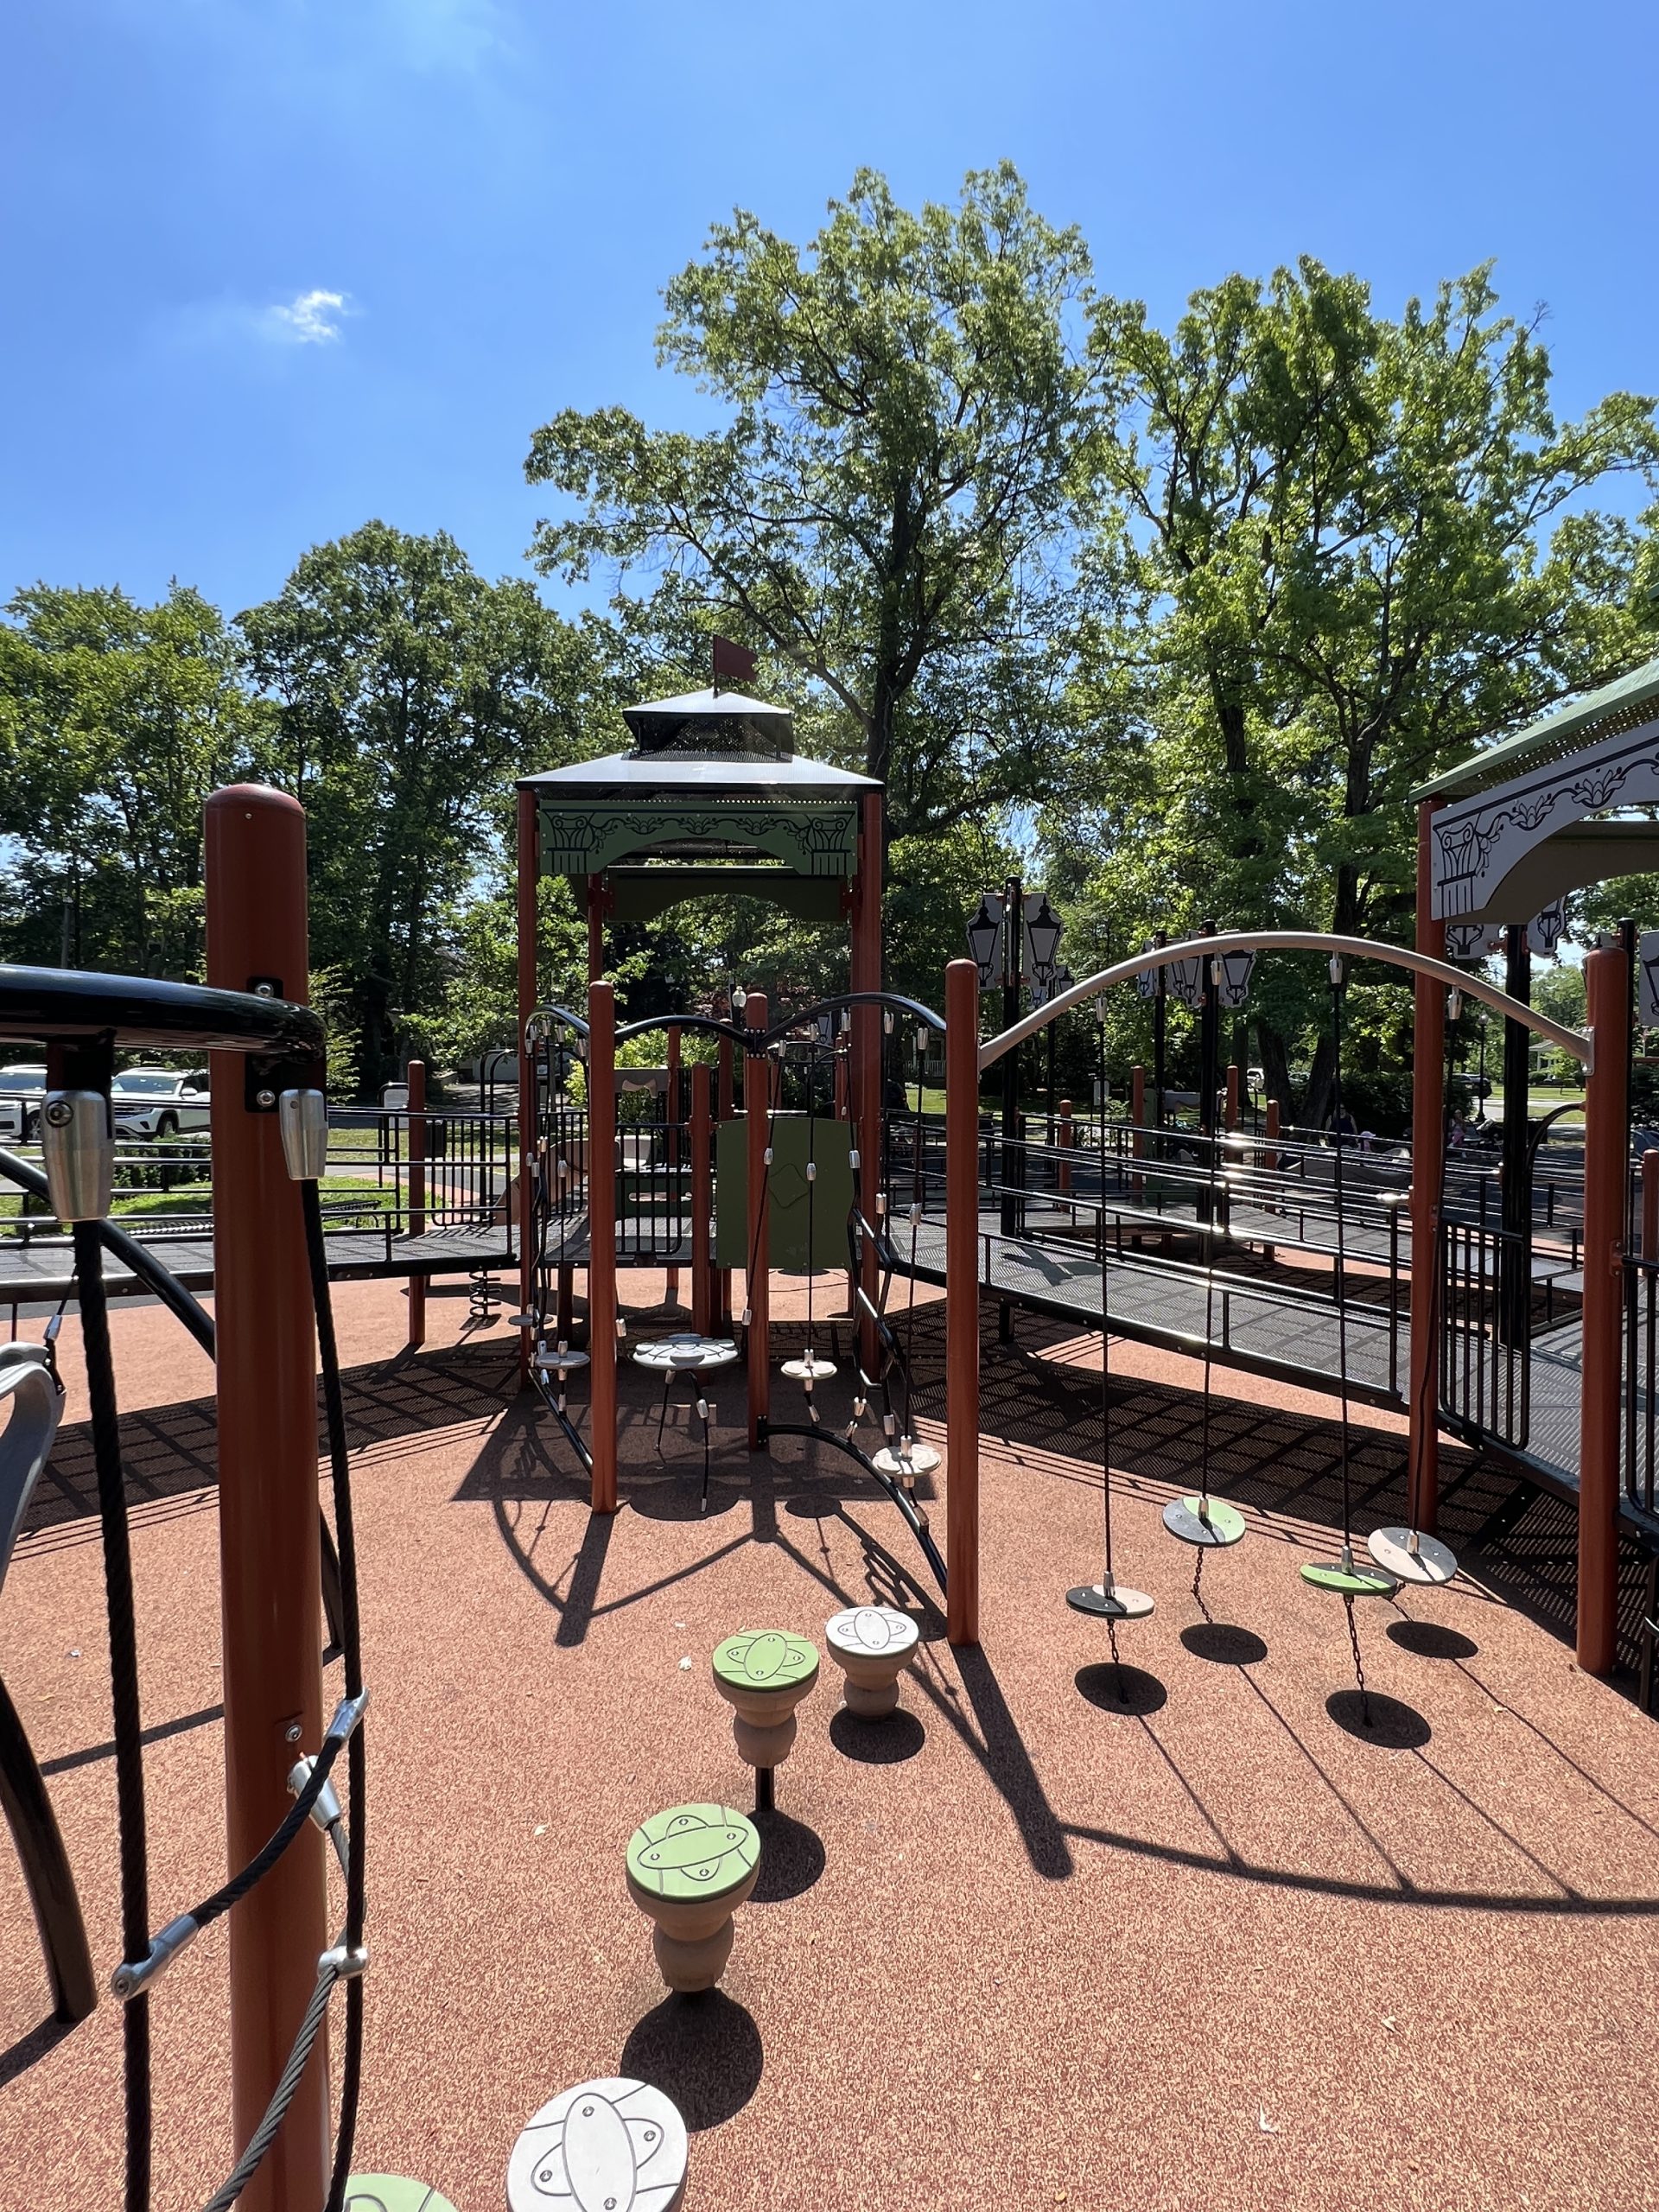 Climbing ropes and stepping pods at Mindowaskin Park Playground in Westfield NJ